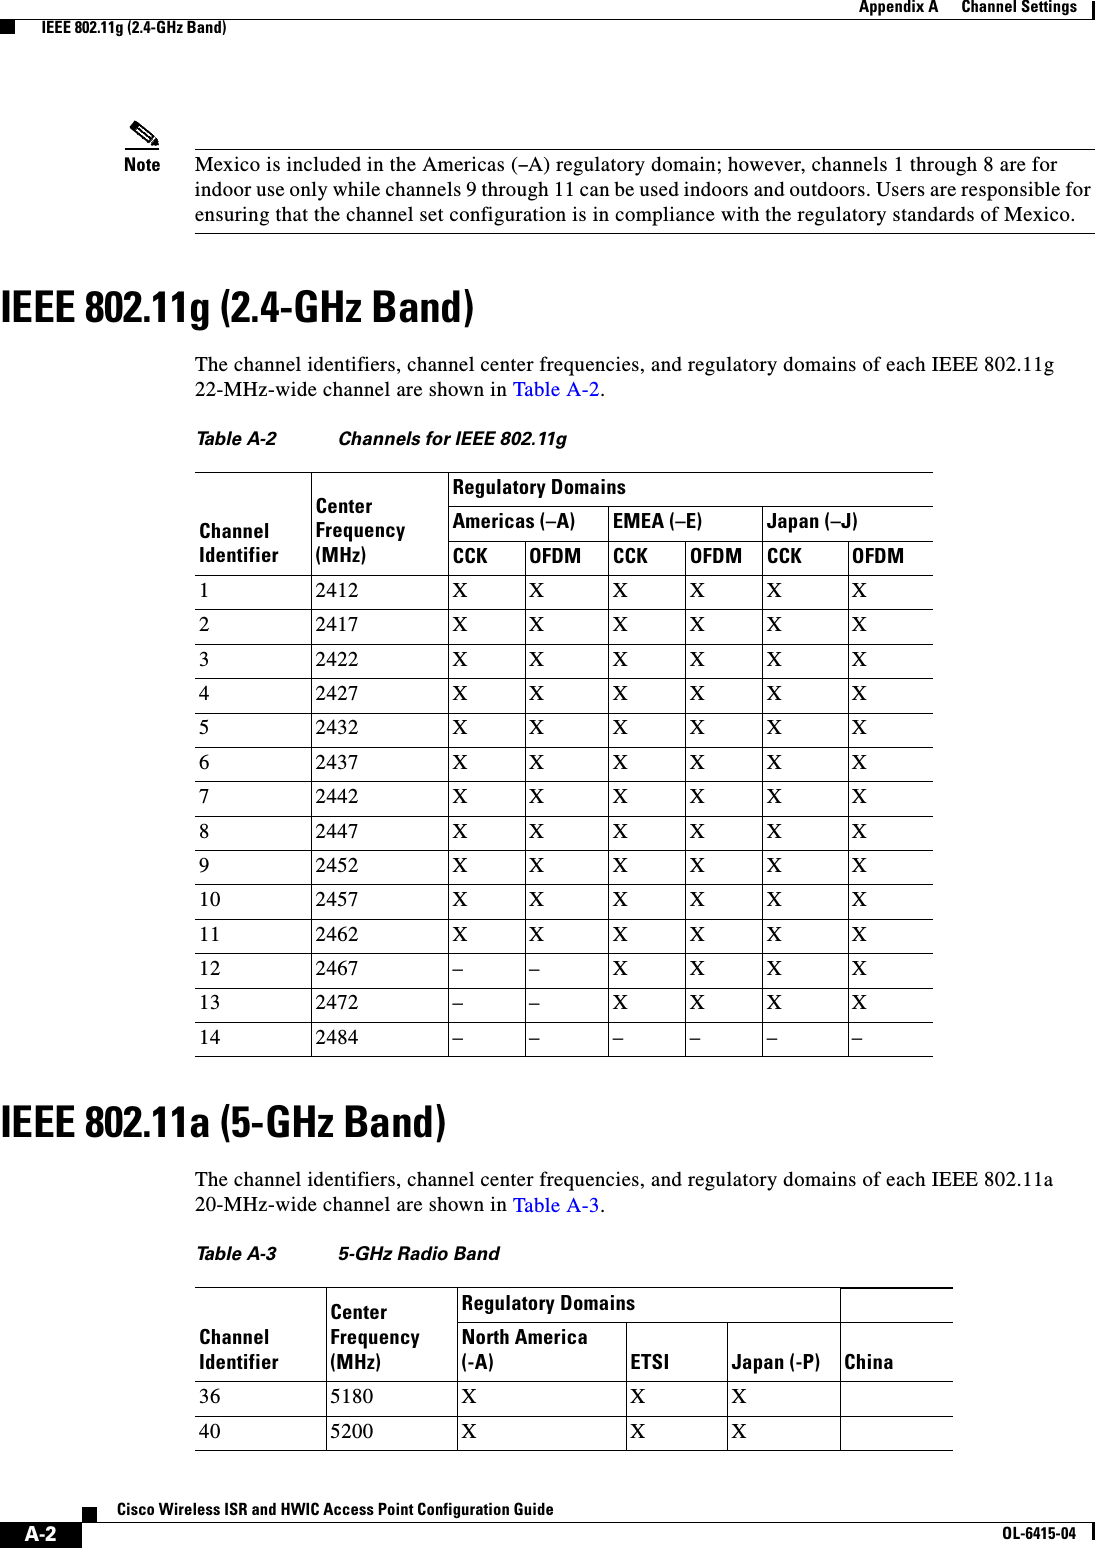  A-2Cisco Wireless ISR and HWIC Access Point Configuration GuideOL-6415-04Appendix A      Channel Settings  IEEE 802.11g (2.4-GHz Band)Note Mexico is included in the Americas (–A) regulatory domain; however, channels 1 through 8 are for indoor use only while channels 9 through 11 can be used indoors and outdoors. Users are responsible for ensuring that the channel set configuration is in compliance with the regulatory standards of Mexico.IEEE 802.11g (2.4-GHz Band)The channel identifiers, channel center frequencies, and regulatory domains of each IEEE 802.11g 22-MHz-wide channel are shown in Table A-2.IEEE 802.11a (5-GHz Band)The channel identifiers, channel center frequencies, and regulatory domains of each IEEE 802.11a 20-MHz-wide channel are shown in Table A-3.Ta b l e  A-2 Channels for IEEE 802.11gChannel IdentifierCenter Frequency (MHz)Regulatory DomainsAmericas (–A) EMEA (–E) Japan (–J)CCK OFDM CCK OFDM CCK OFDM12412 X X X X X X22417 X X X X X X32422 X X X X X X42427 X X X X X X52432 X X X X X X62437 X X X X X X72442 X X X X X X82447 X X X X X X92452 X X X X X X10 2457 X X X X X X11 2462 X X X X X X12 2467 – – X X X X13 2472 – – X X X X14 2484 – – – – – –Ta b l e  A-3 5-GHz Radio Band Channel IdentifierCenter Frequency(MHz)Regulatory DomainsNorth America (-A) ETSI Japan (-P) China36 5180 X X X40 5200 X X X